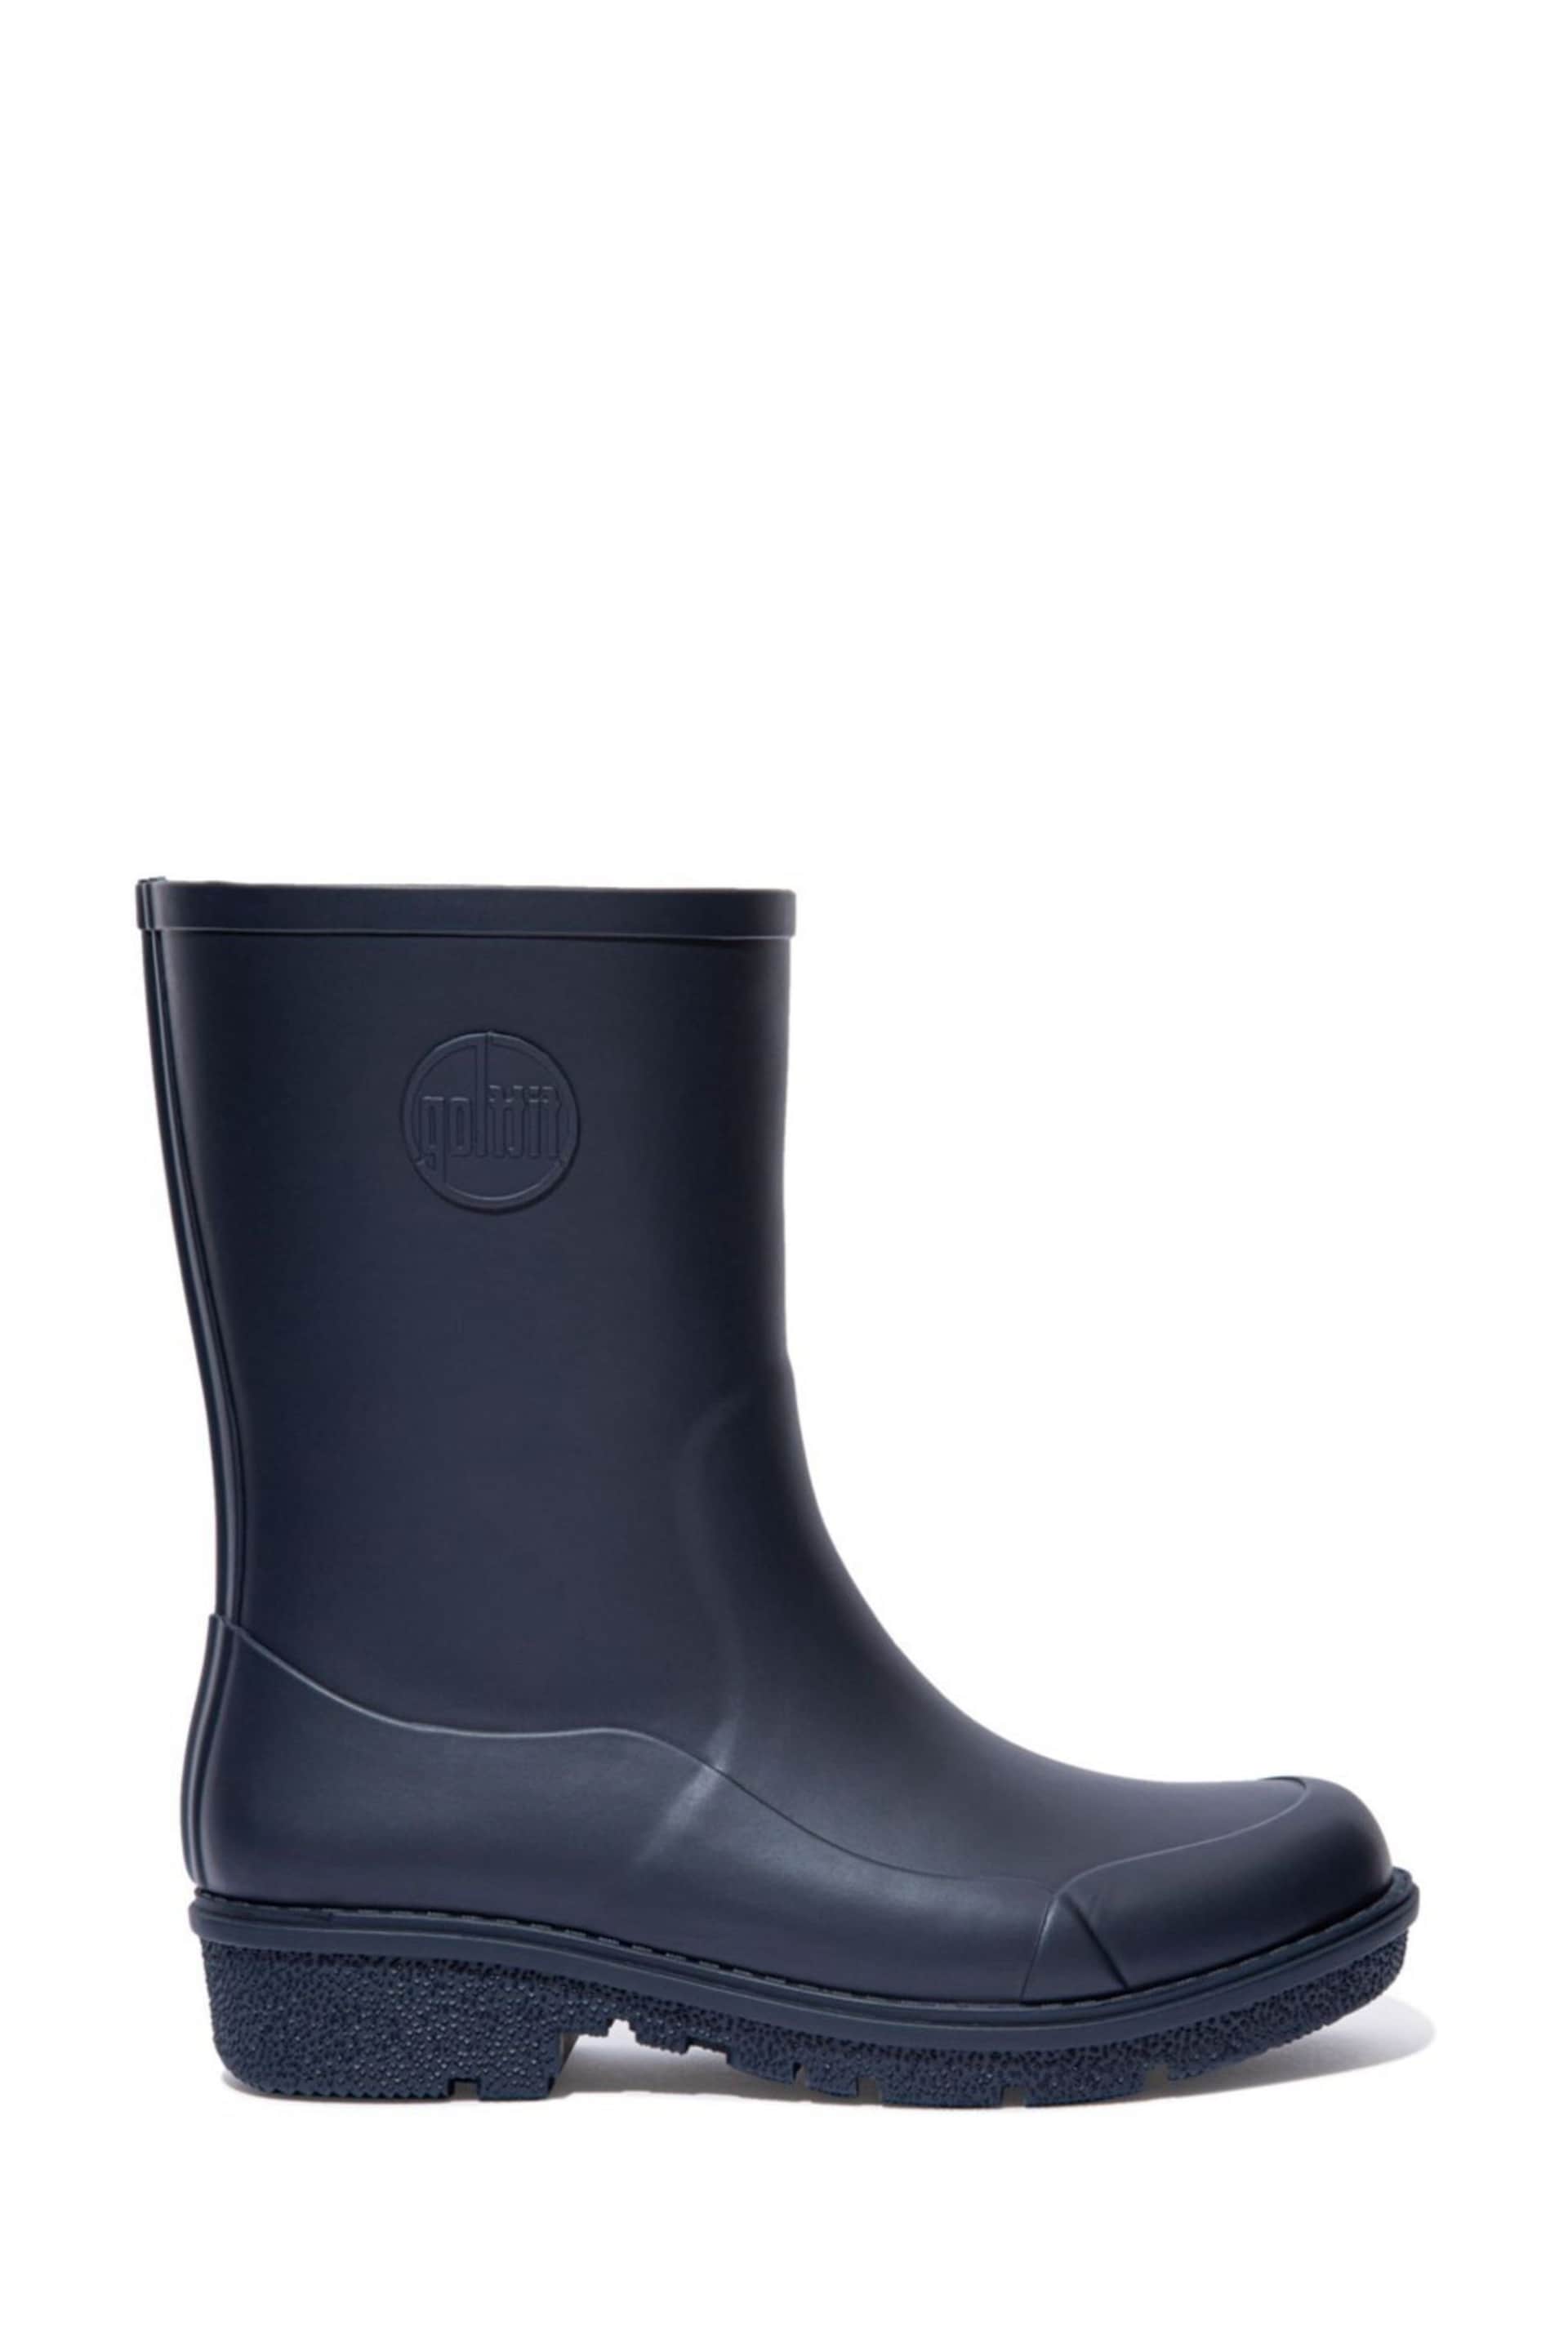 FitFlop Short Blue Wonderwelly Wellies - Image 1 of 5